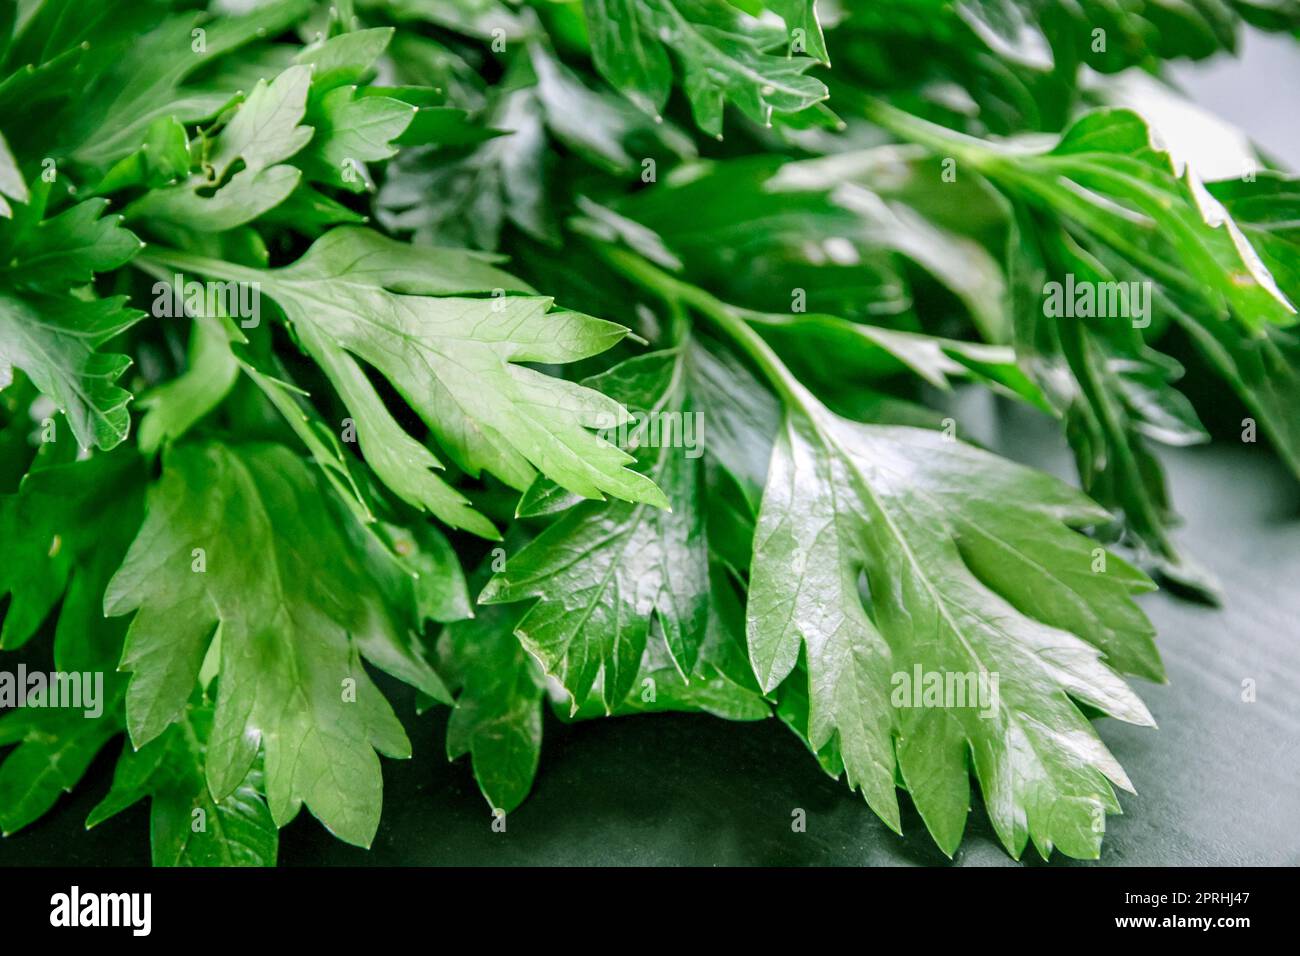 Bunch of parsley stem closeup view Stock Photo